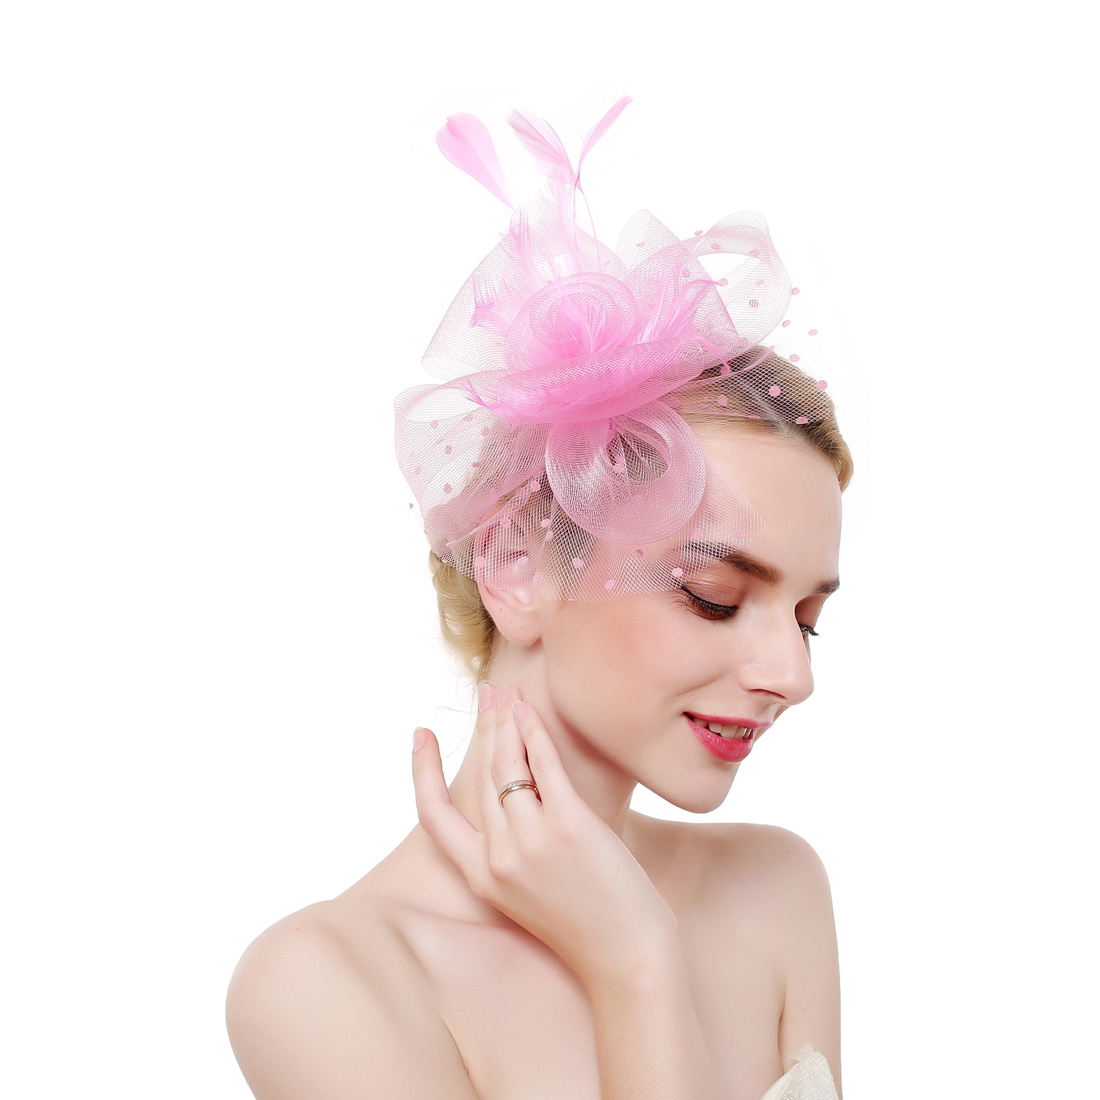 D-groee Fascinators Hat Tea Party Pillbox Hat Feathers Decor Headband for Cocktail Party, Size: 30, Pink